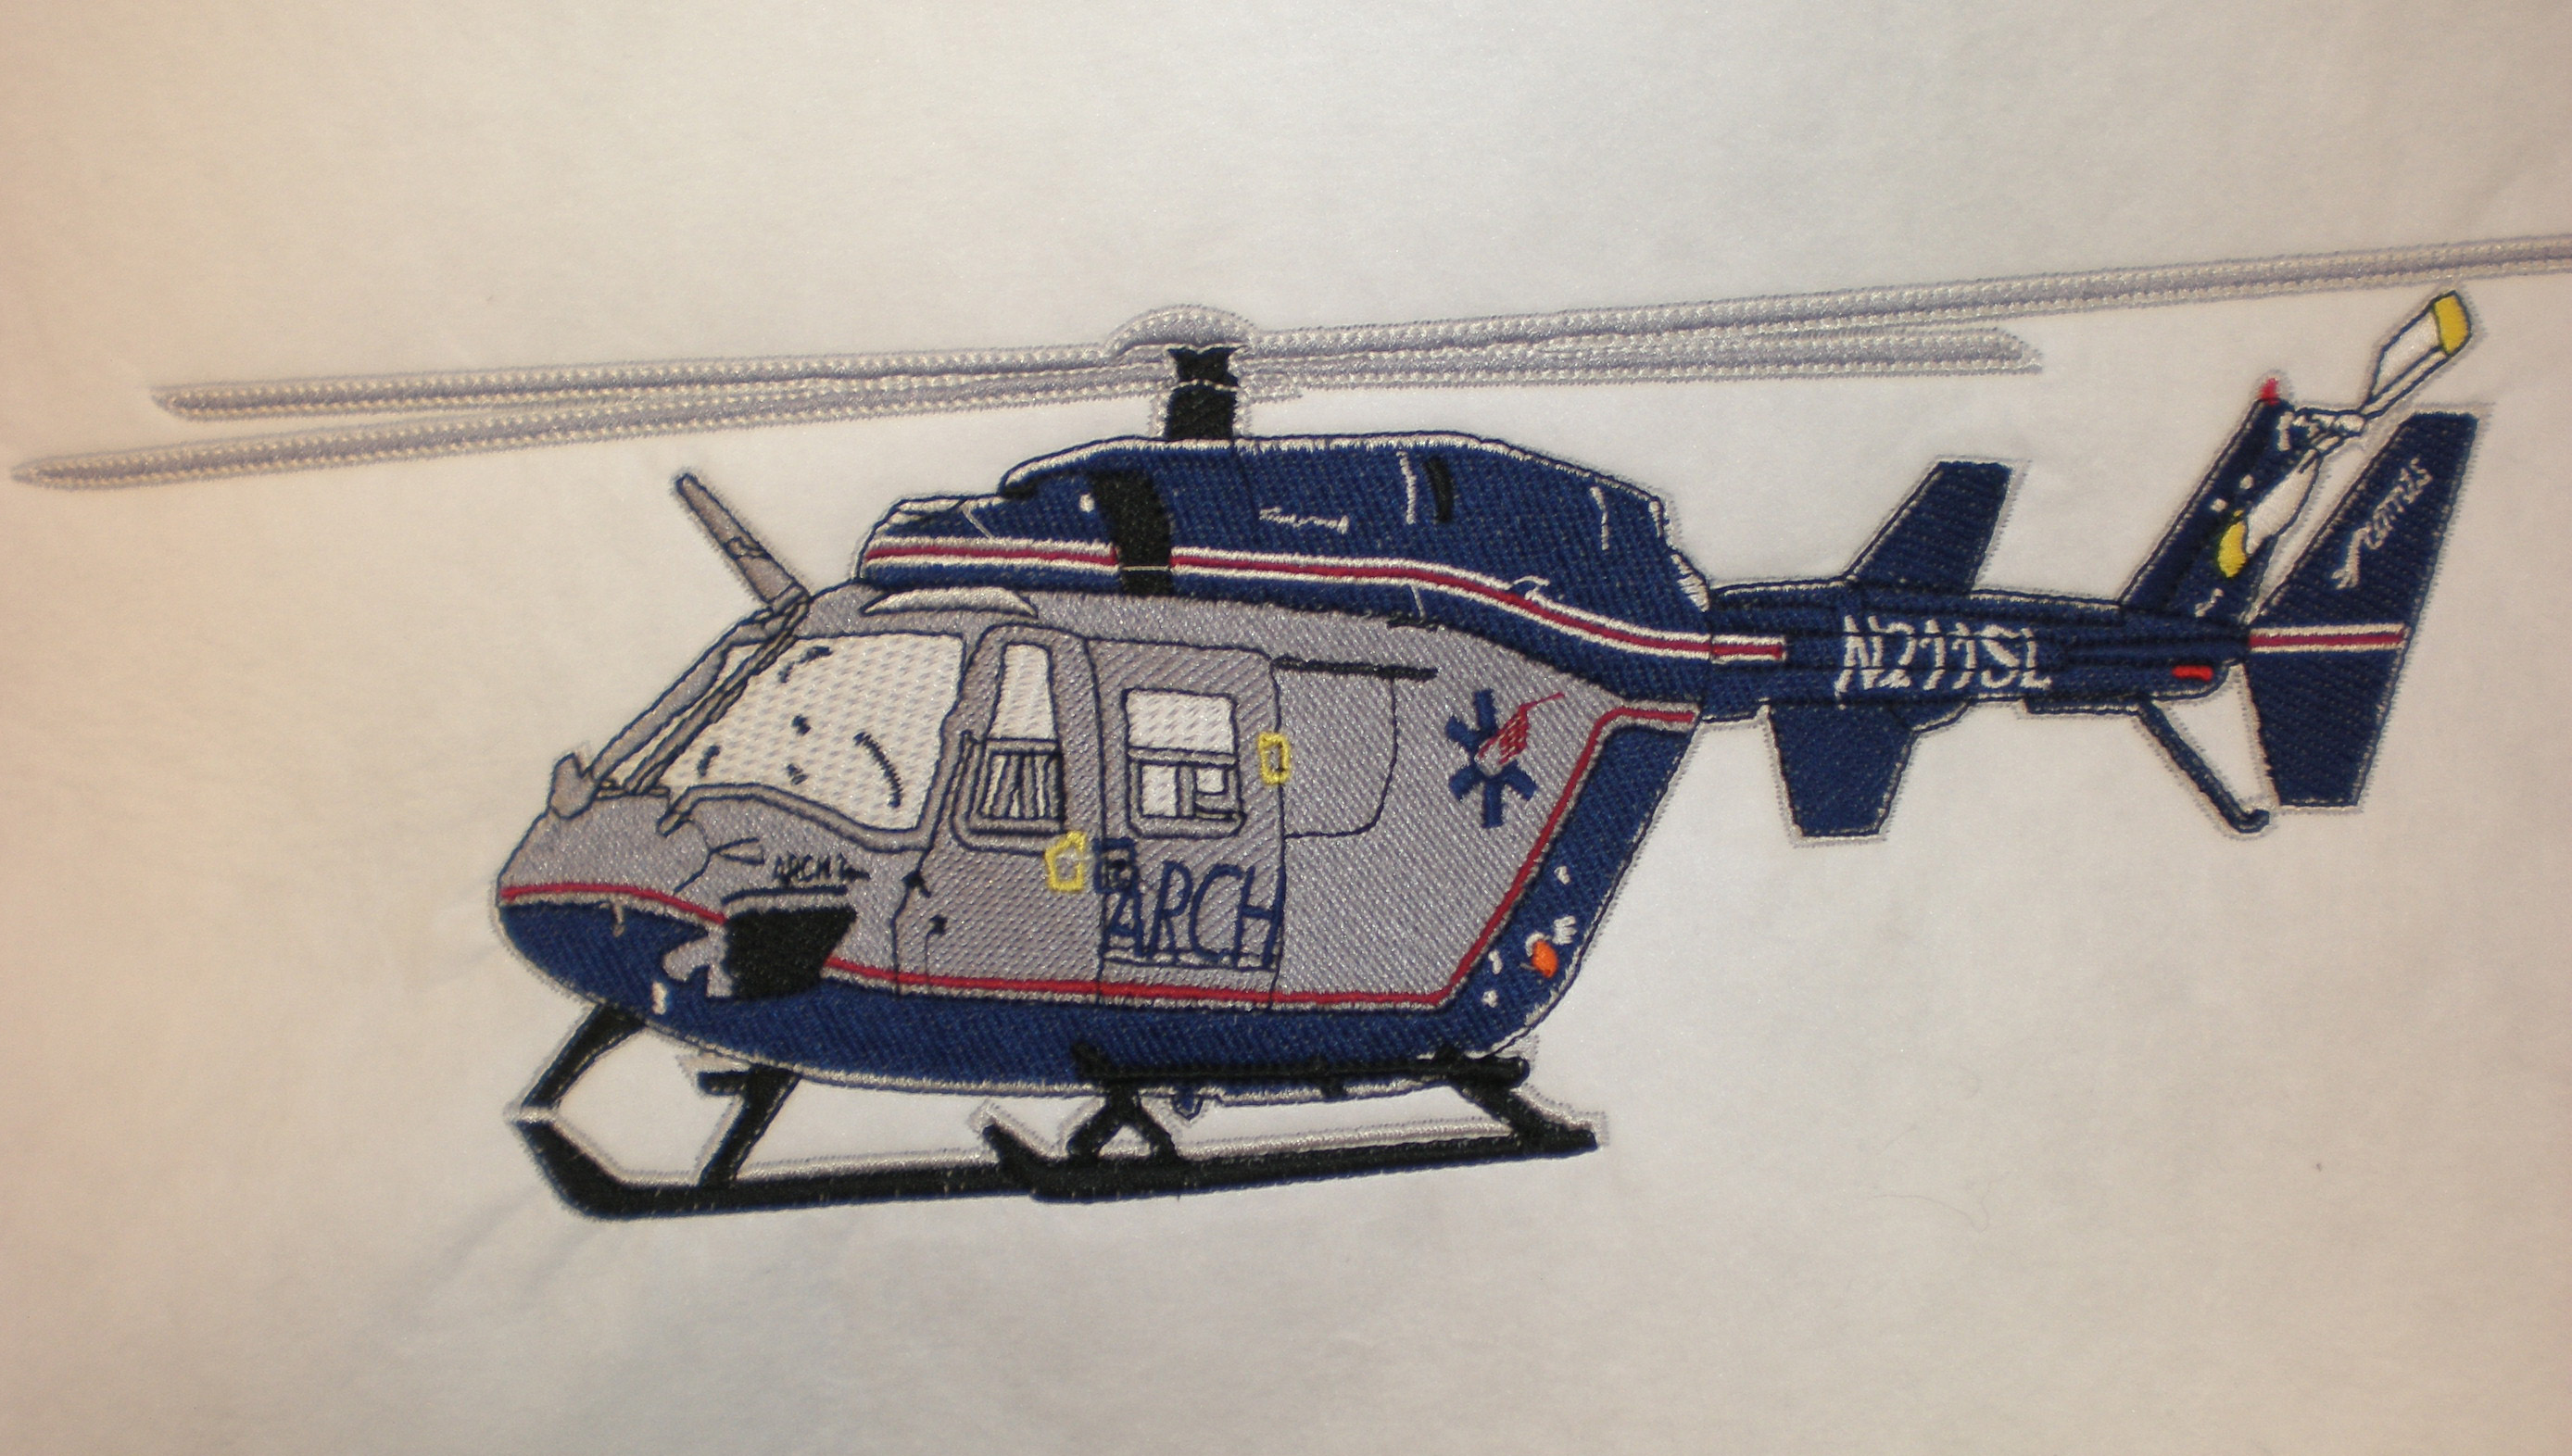 Helicopter captured after accident. Replicated from a photograph of the vehicle and removing the background and cleaning up and restoring the artwork